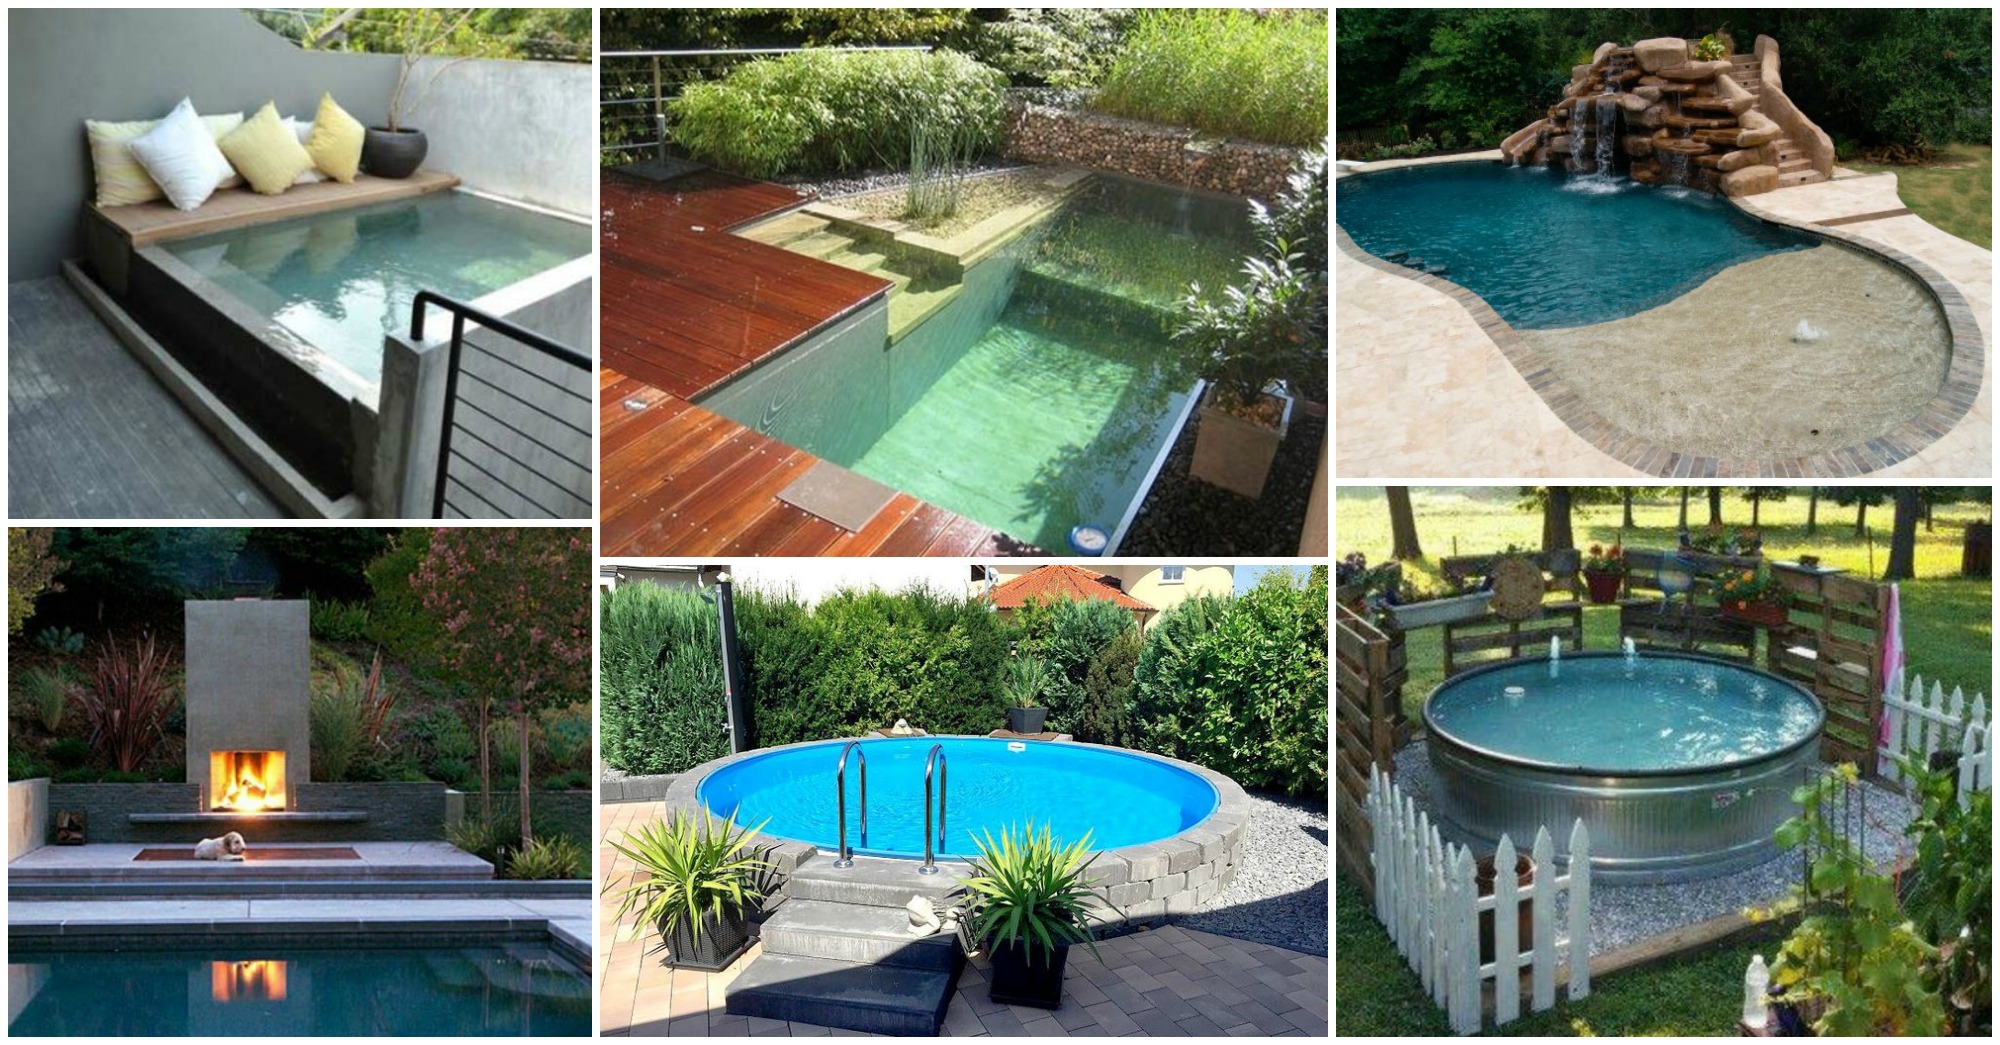 Outstanding Backyard Pool Ideas That Will Make You Say WOW